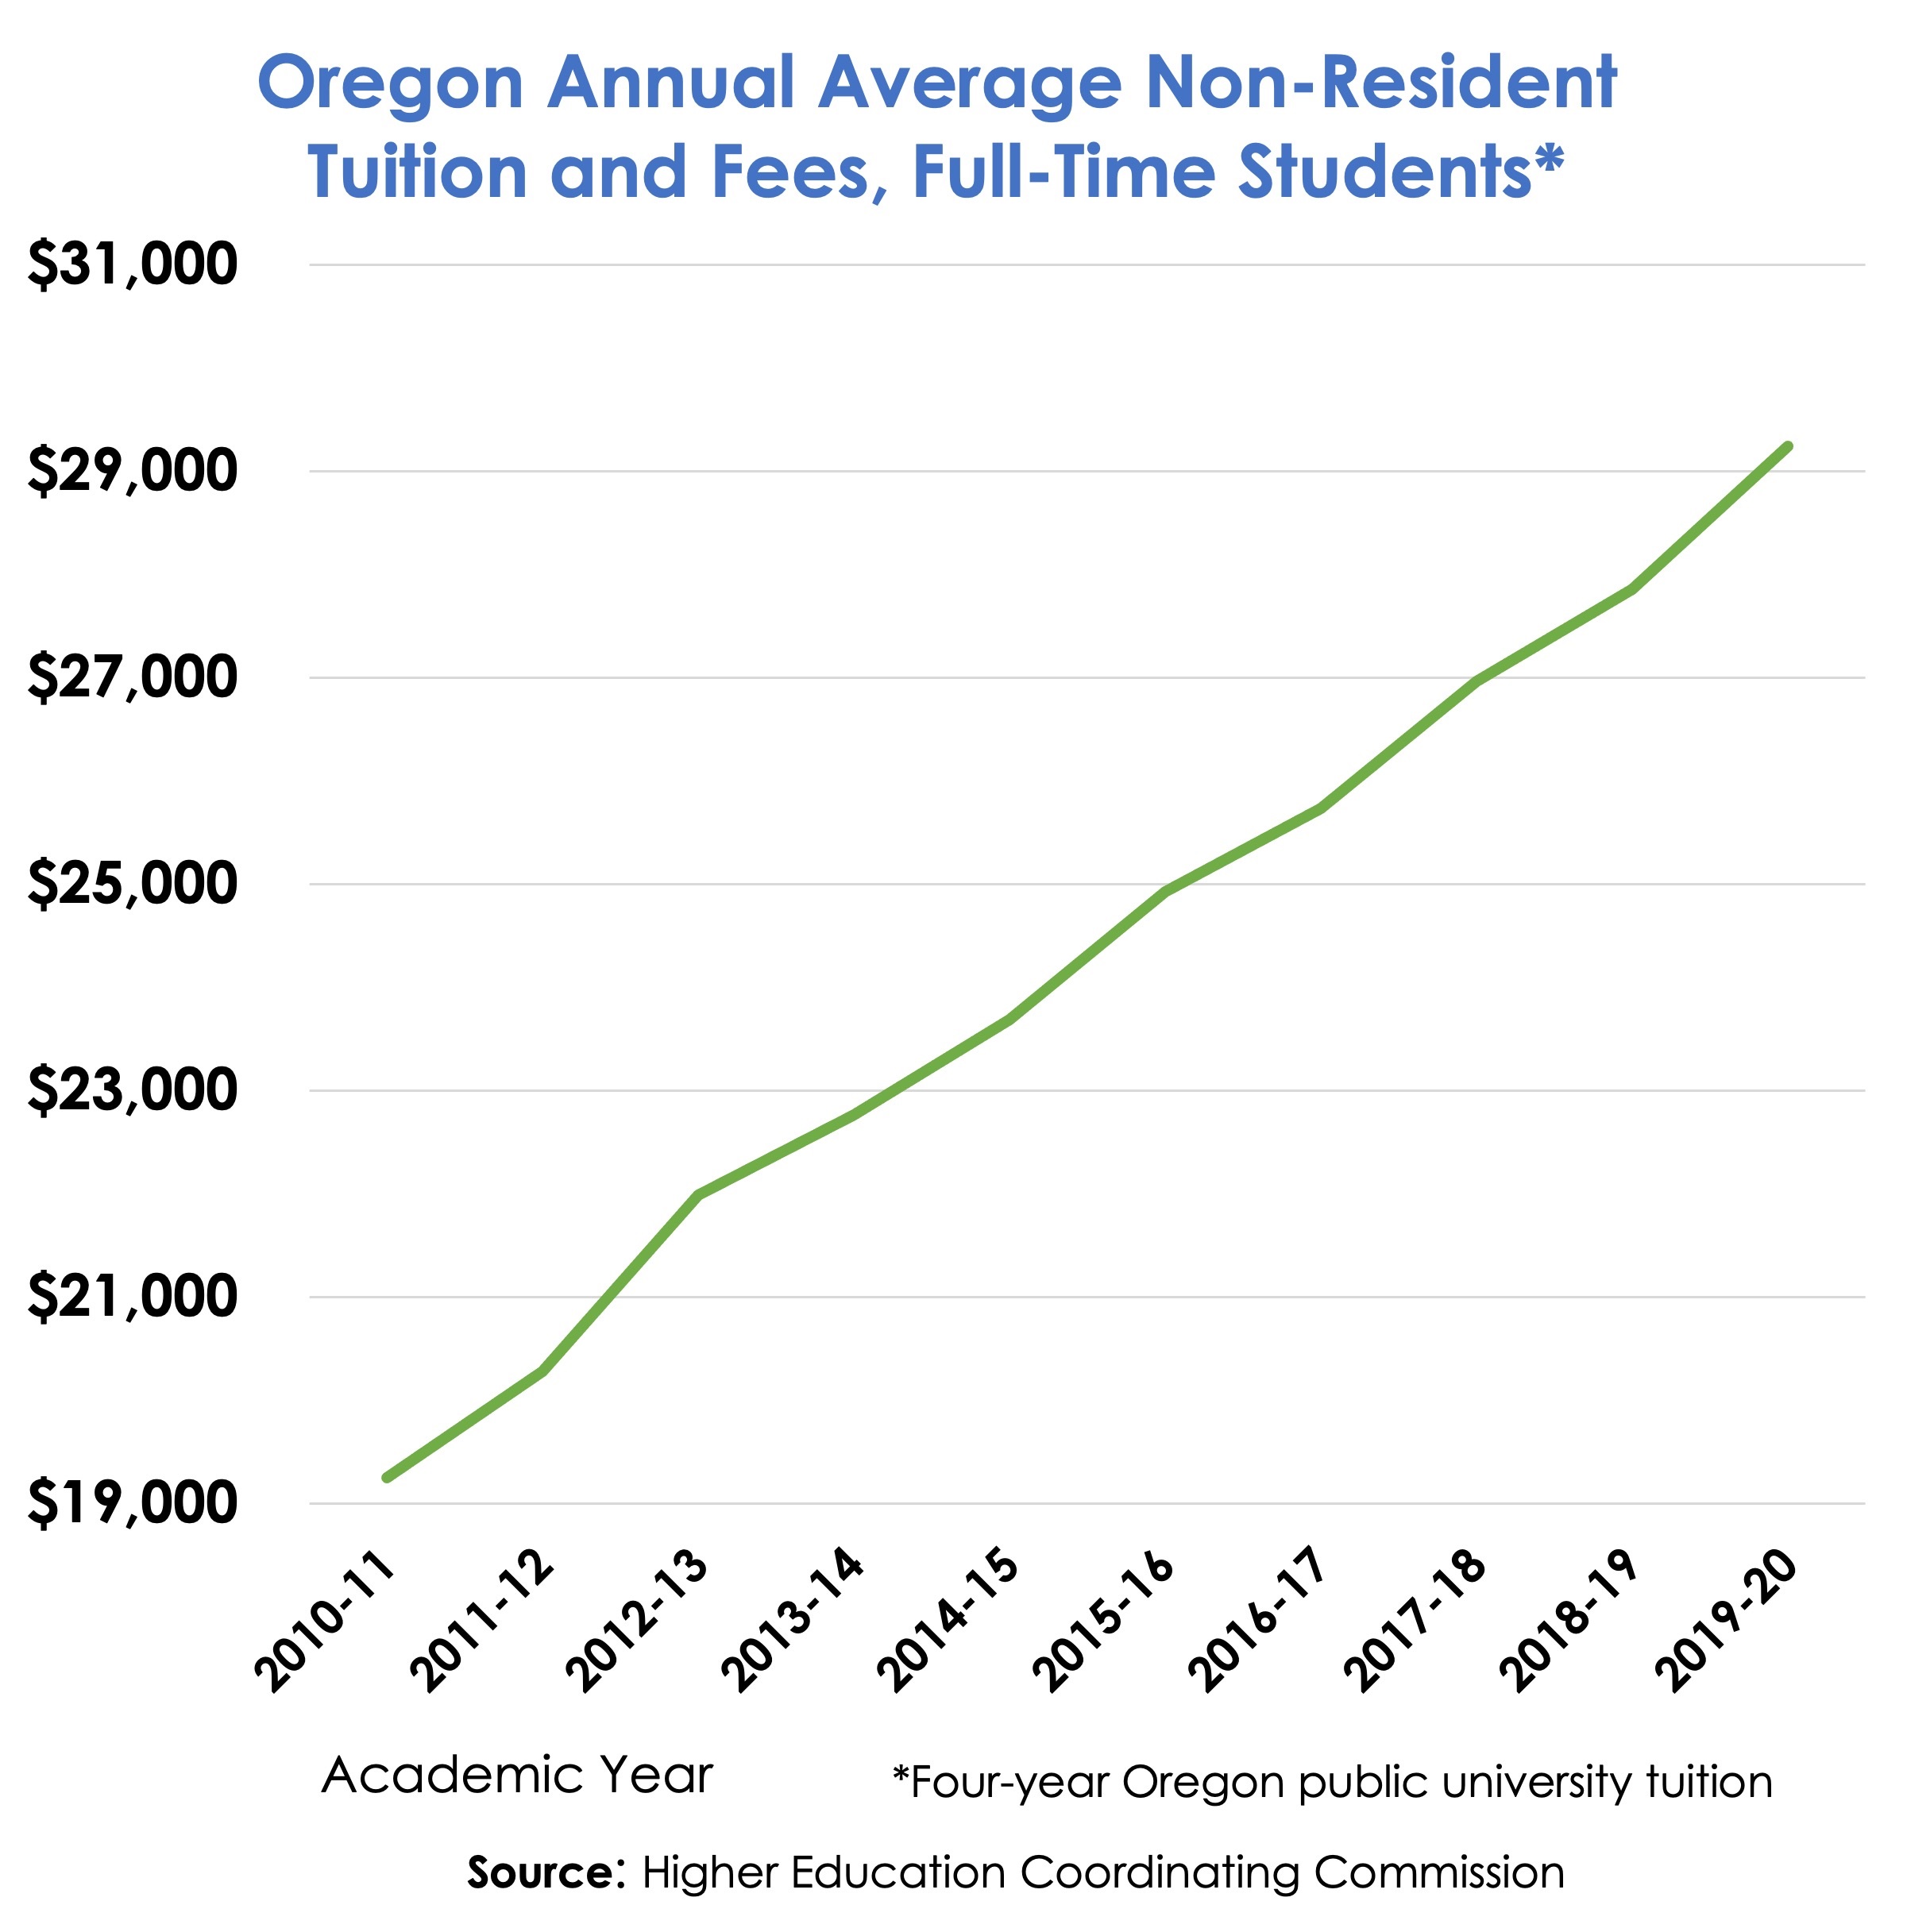 Chart shows Oregon Annual Average Non-resident tuition and fees full time students about 29000 in 2019-20